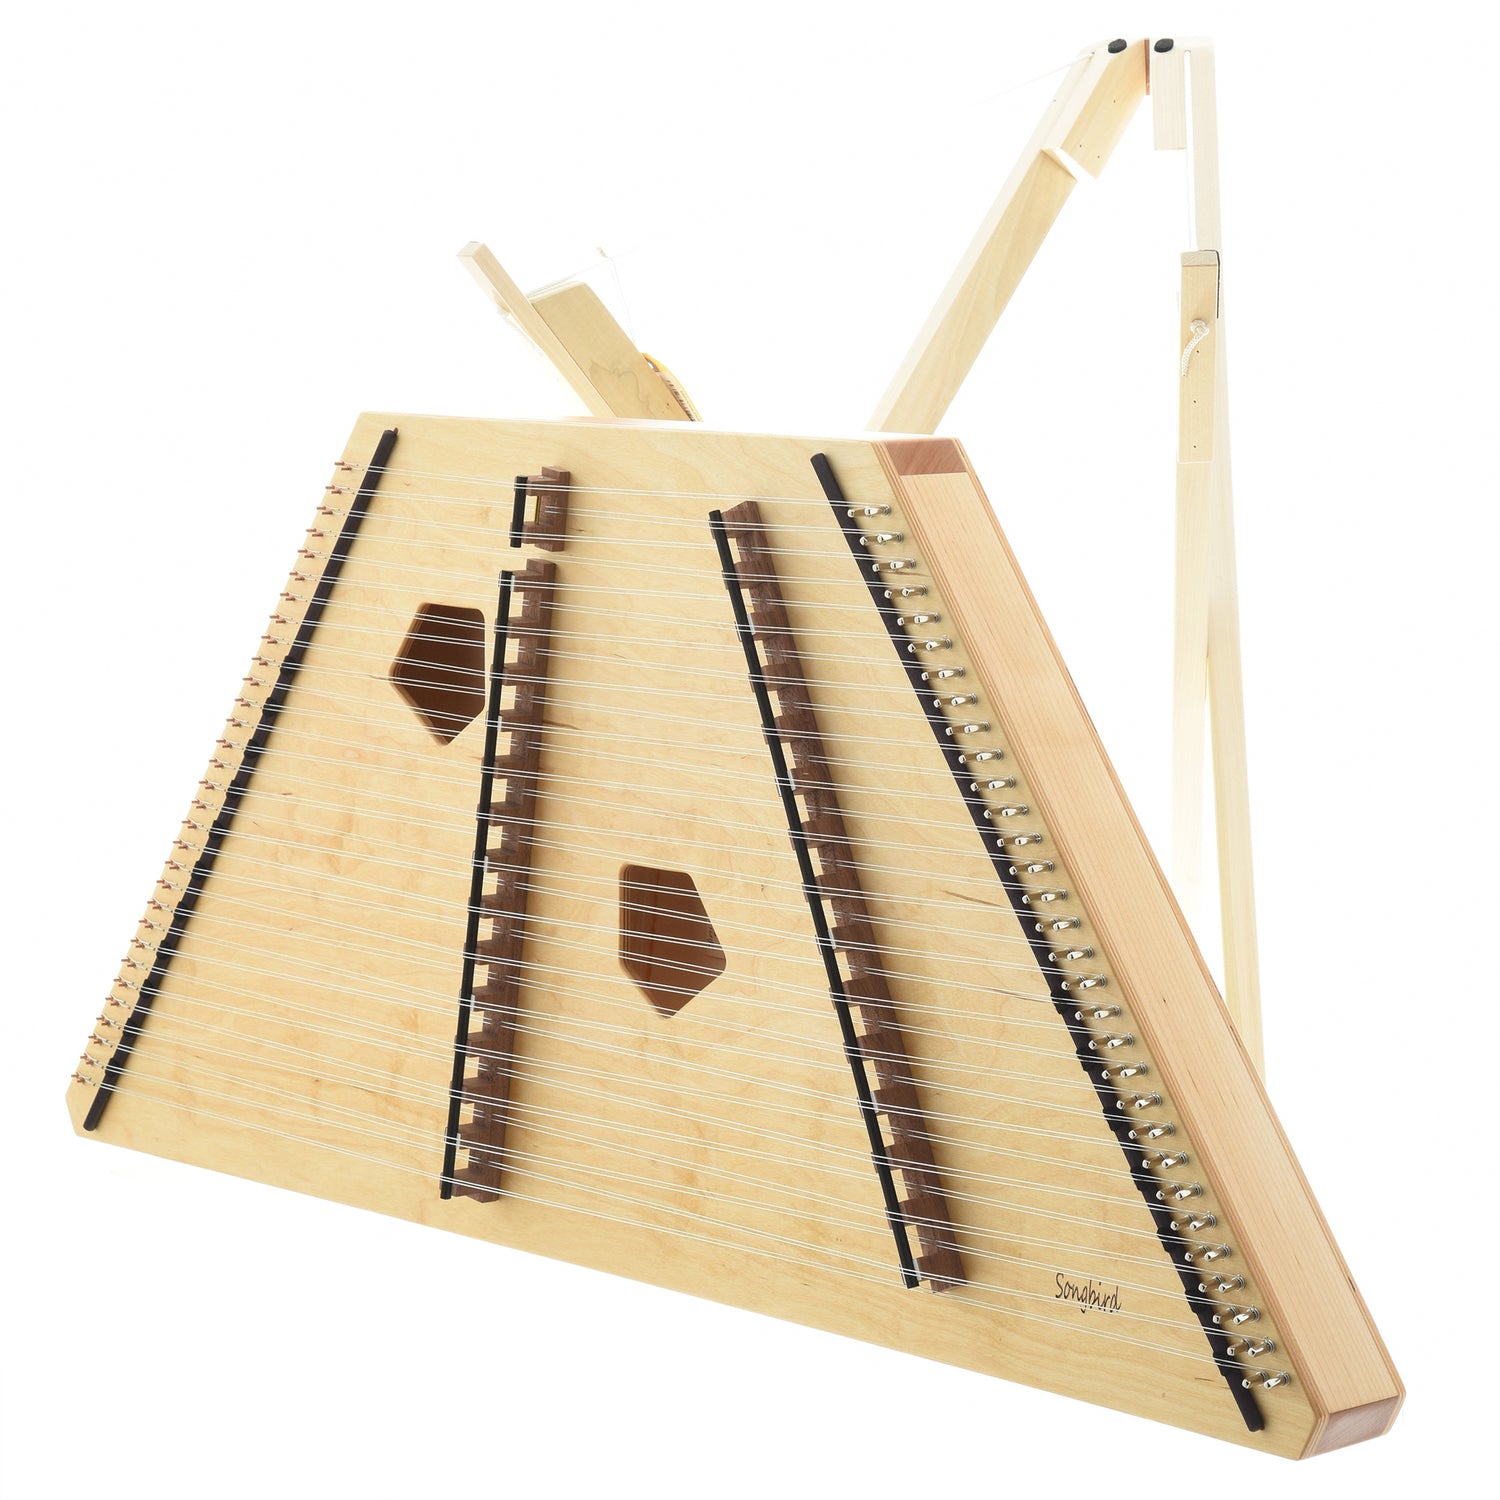 Side and stand of Songbird Phoebe 16/15 Hammered Dulcimer